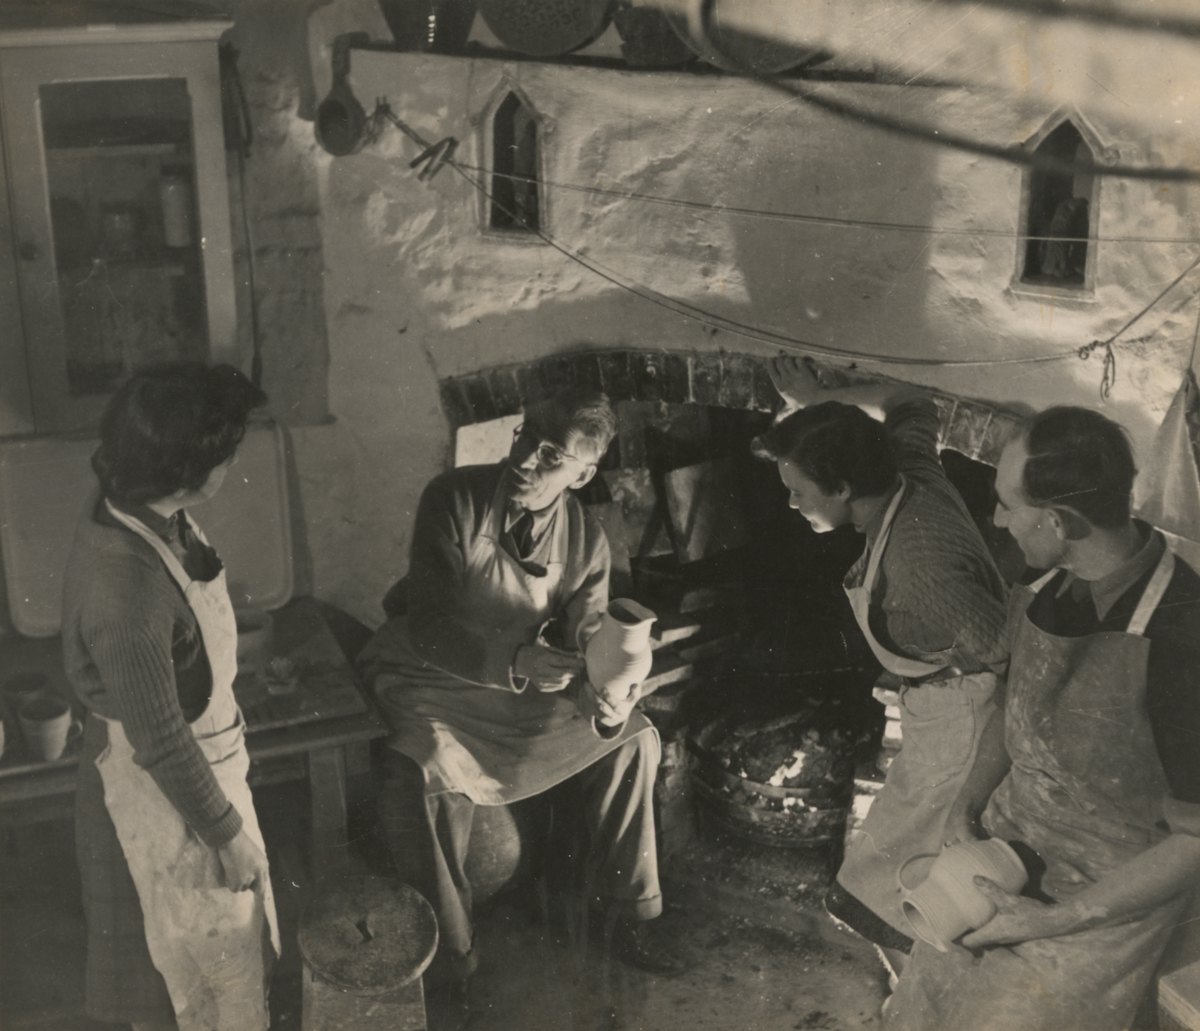 Bernard Leach with his son, David and students in the Old Pottery in St. Ives, England. From the Bernard Leach archive at the Crafts Study Centre, University for the Creative Arts, BHL/8999A.